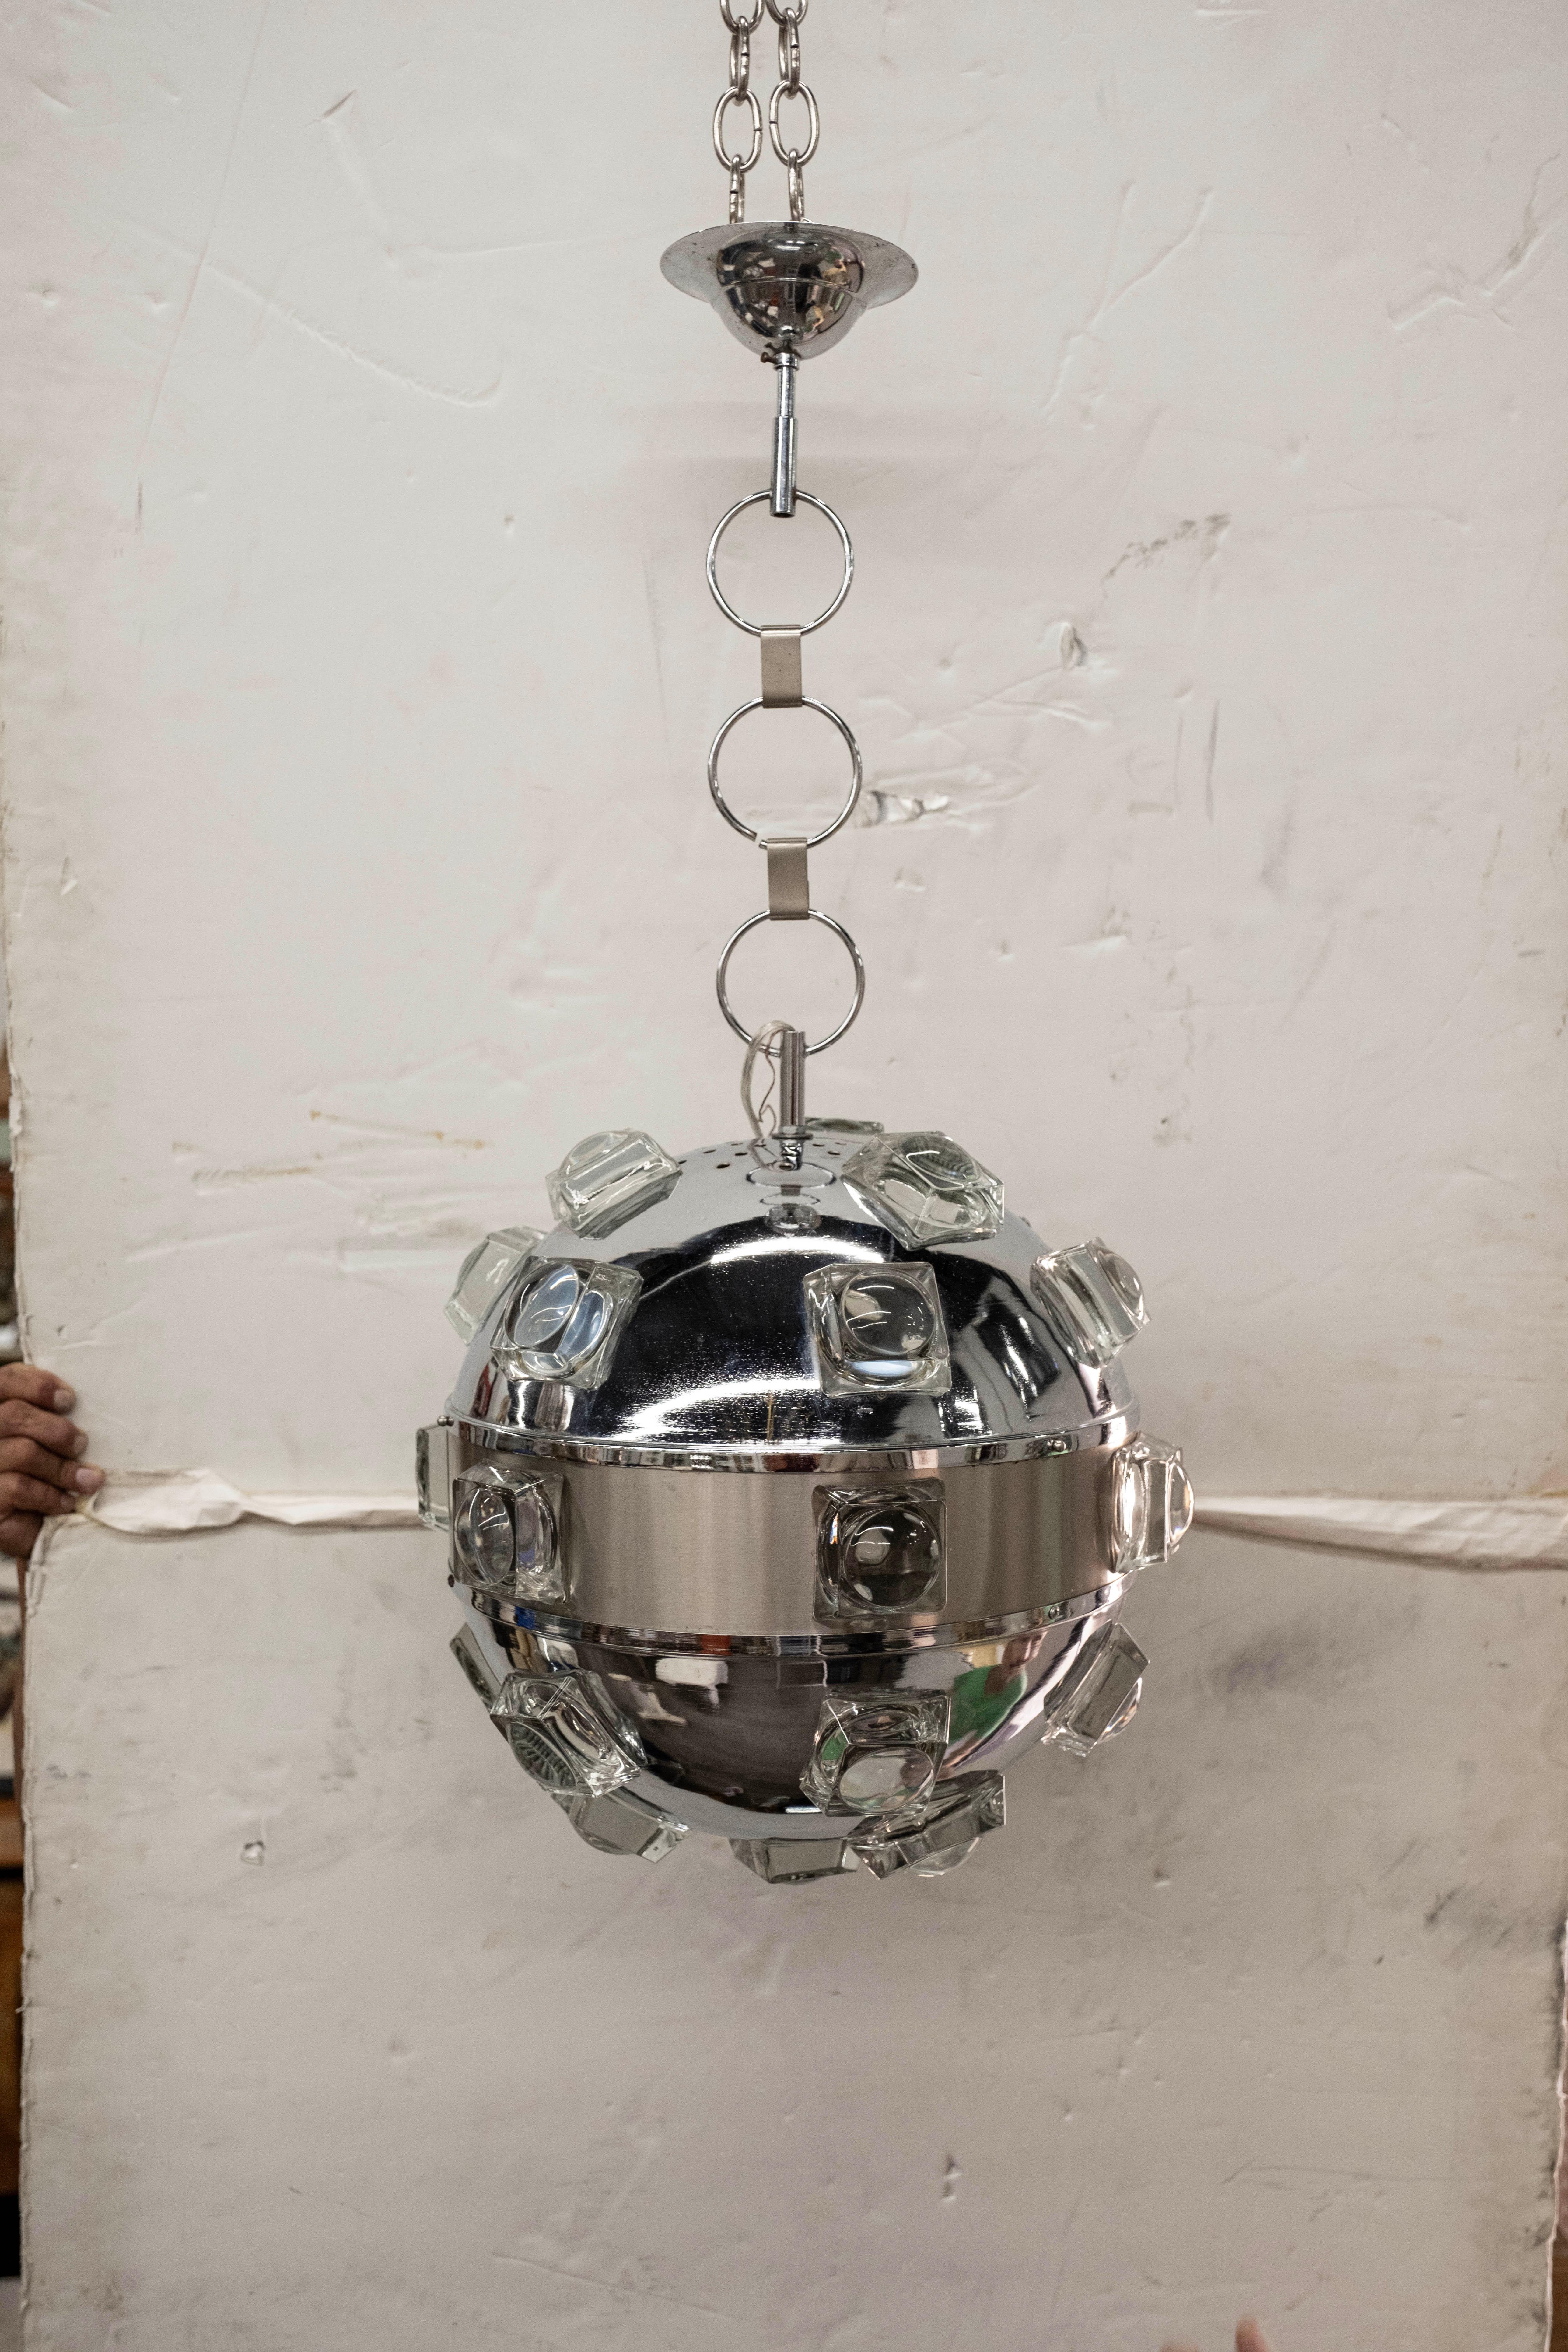 Italian Modern Chrome and Glass Orb Lantern by Oscar Torlasco.
This stunning Italian sphere shaped lantern, pendant or chandelier is comprised of chrome with square glass inserts. It retains the original chrome chain. The chain can be replaced with